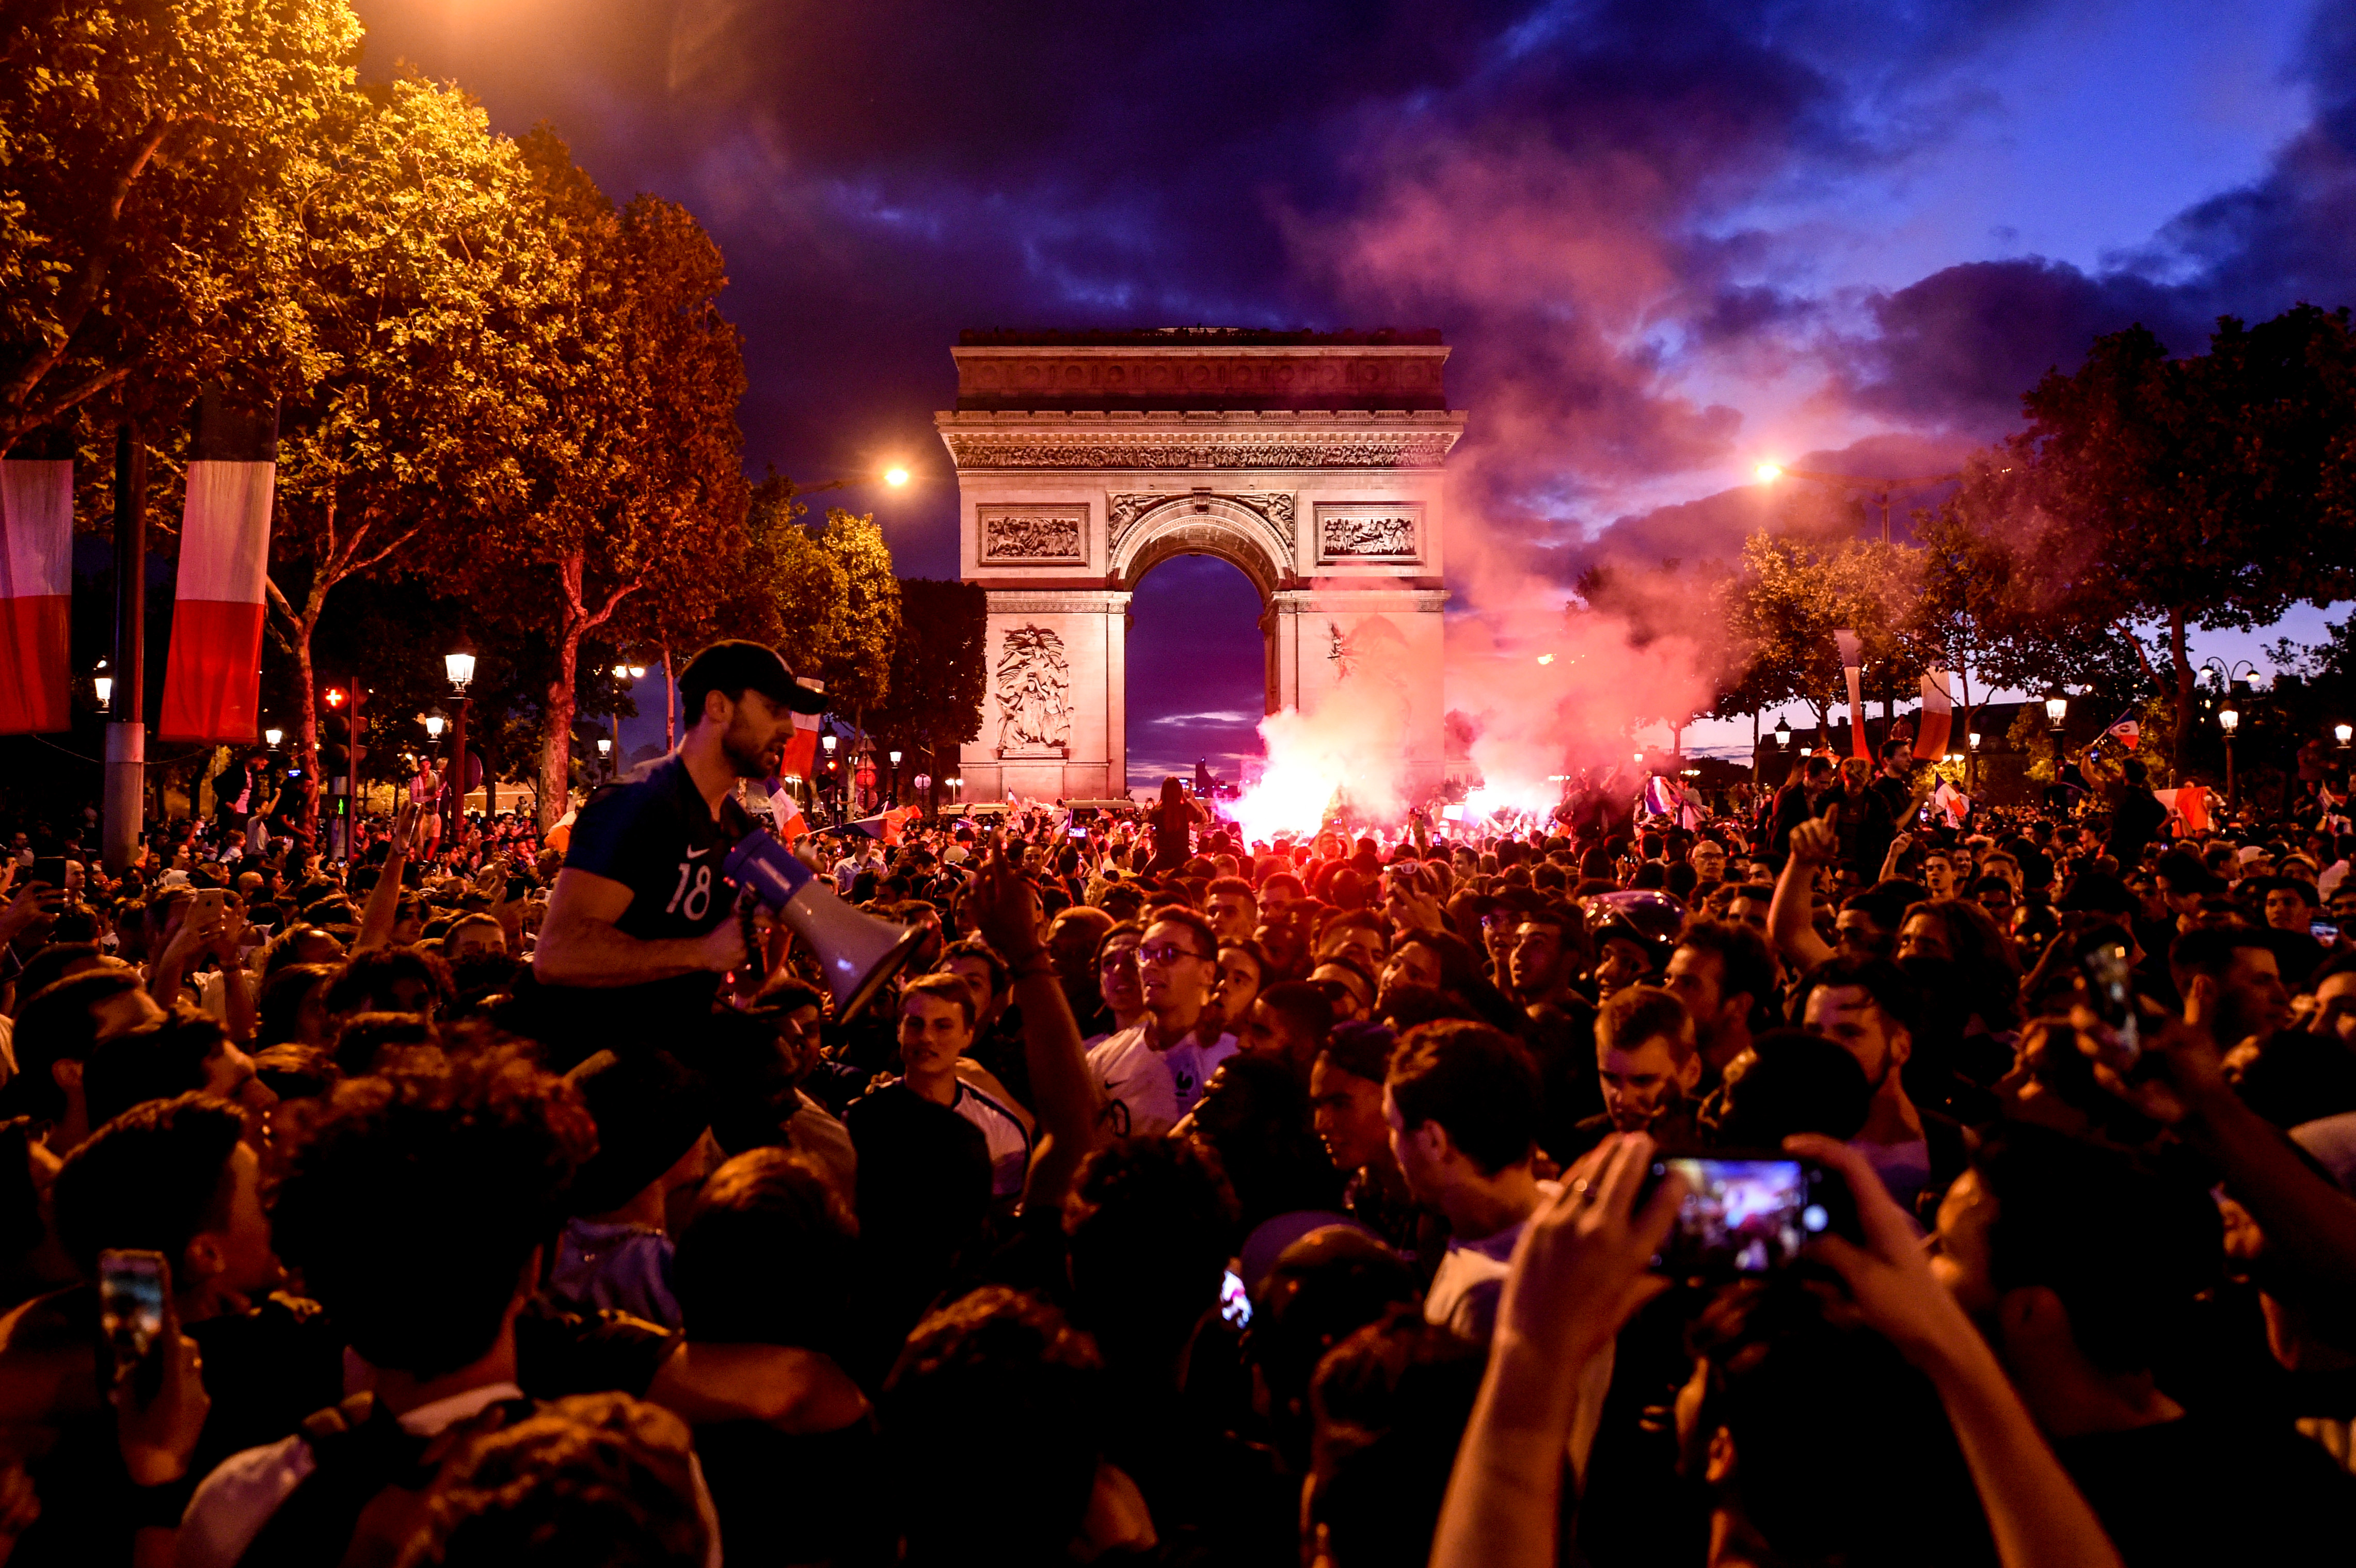 PARIS, FRANCE - JULY 10: Ambiance on Les Champs Elysees after the victory of France. Semi final Fifa world cup 2018. July 10, 2018 in Paris, France. (Photo by Anthony Ghnassia/Getty Images)